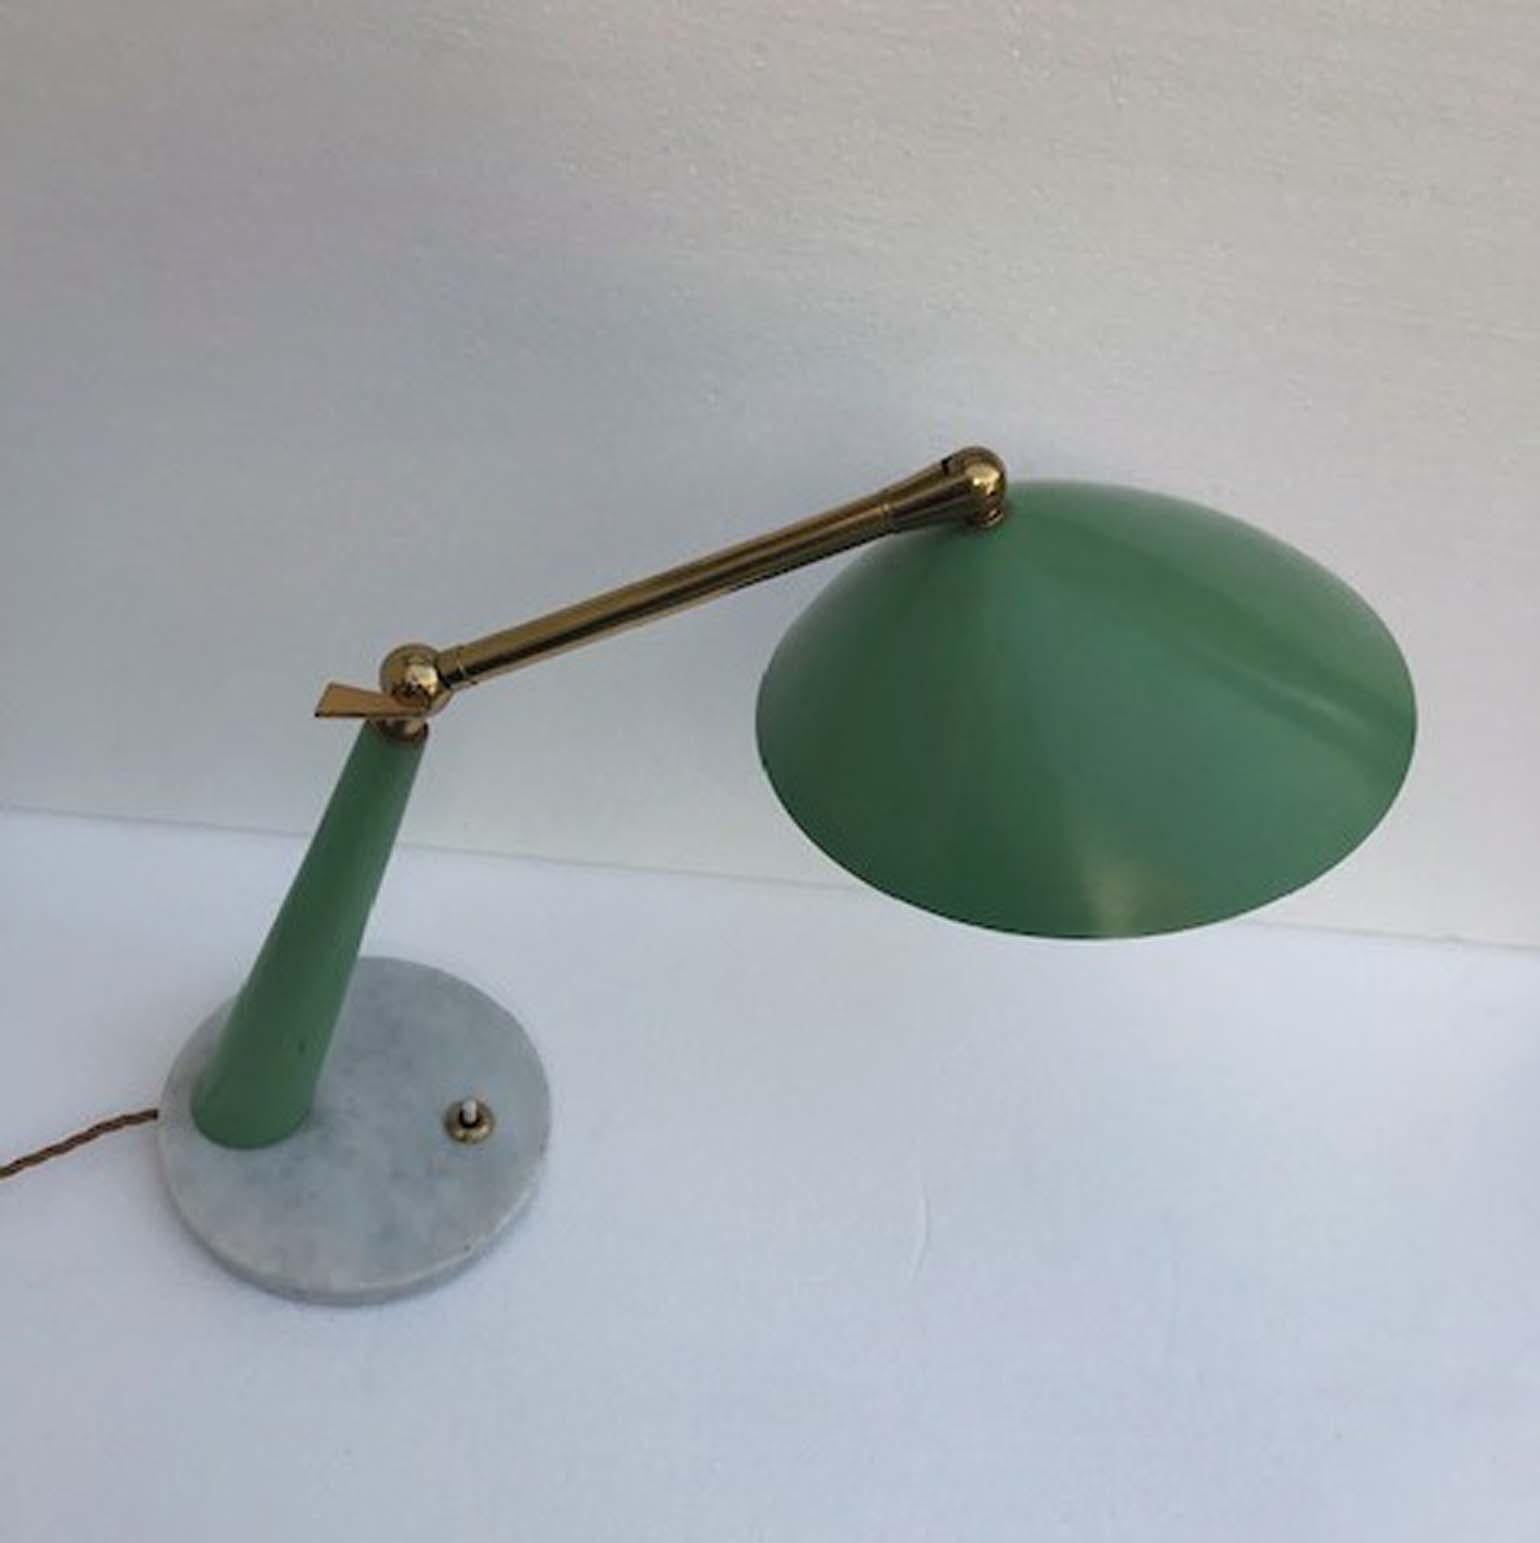 Italian Green and Brass Desk or Table Light, Stillux Italy 1950s on Marble Foot